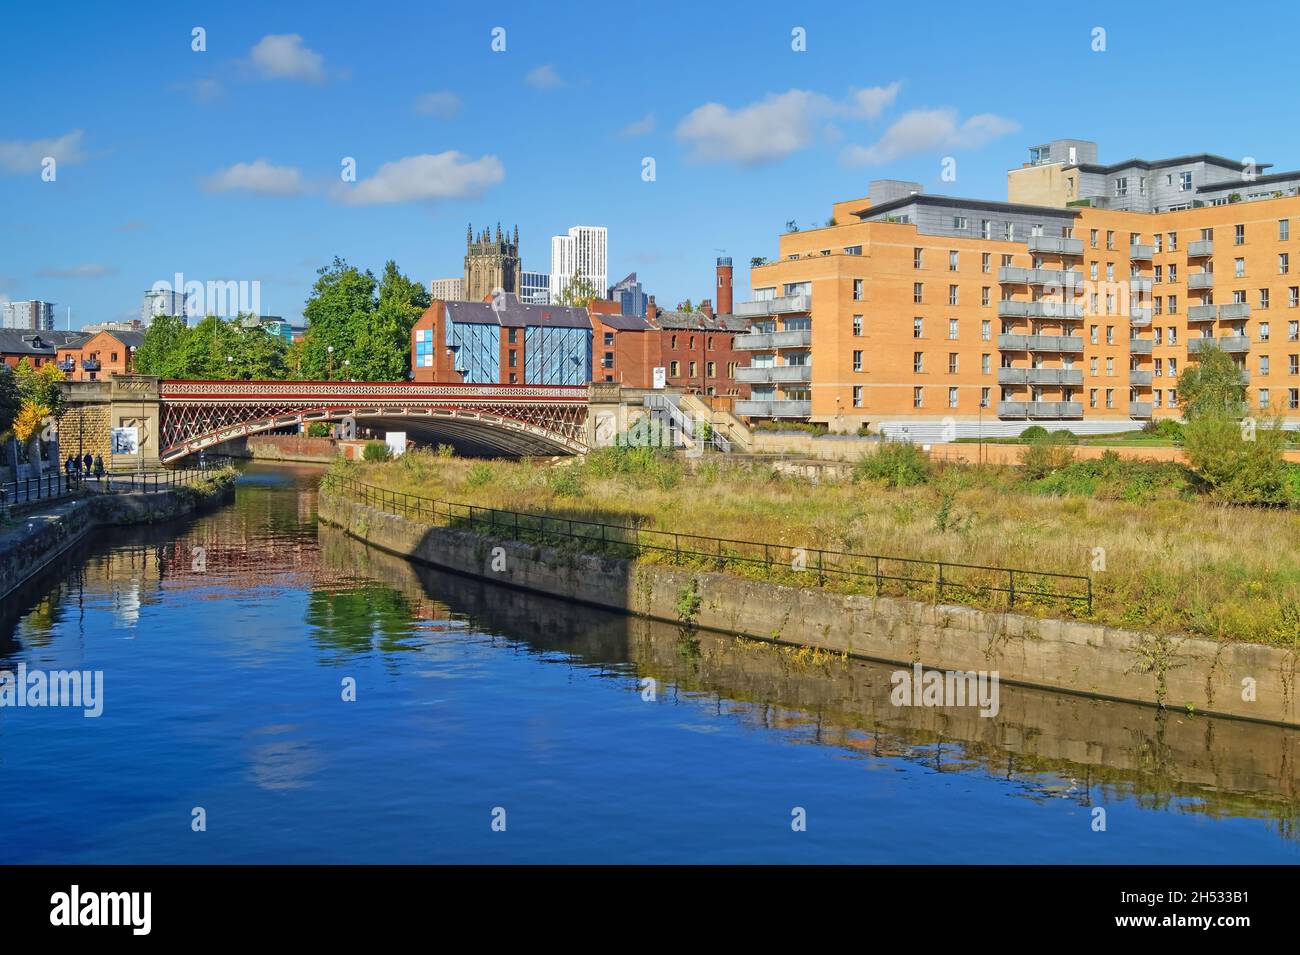 UK, West Yorkshire, Leeds, Crown Point Bridge over the River Aire, with Apartments, Leeds Minster and Altus Building dominating the skyline. Stock Photo